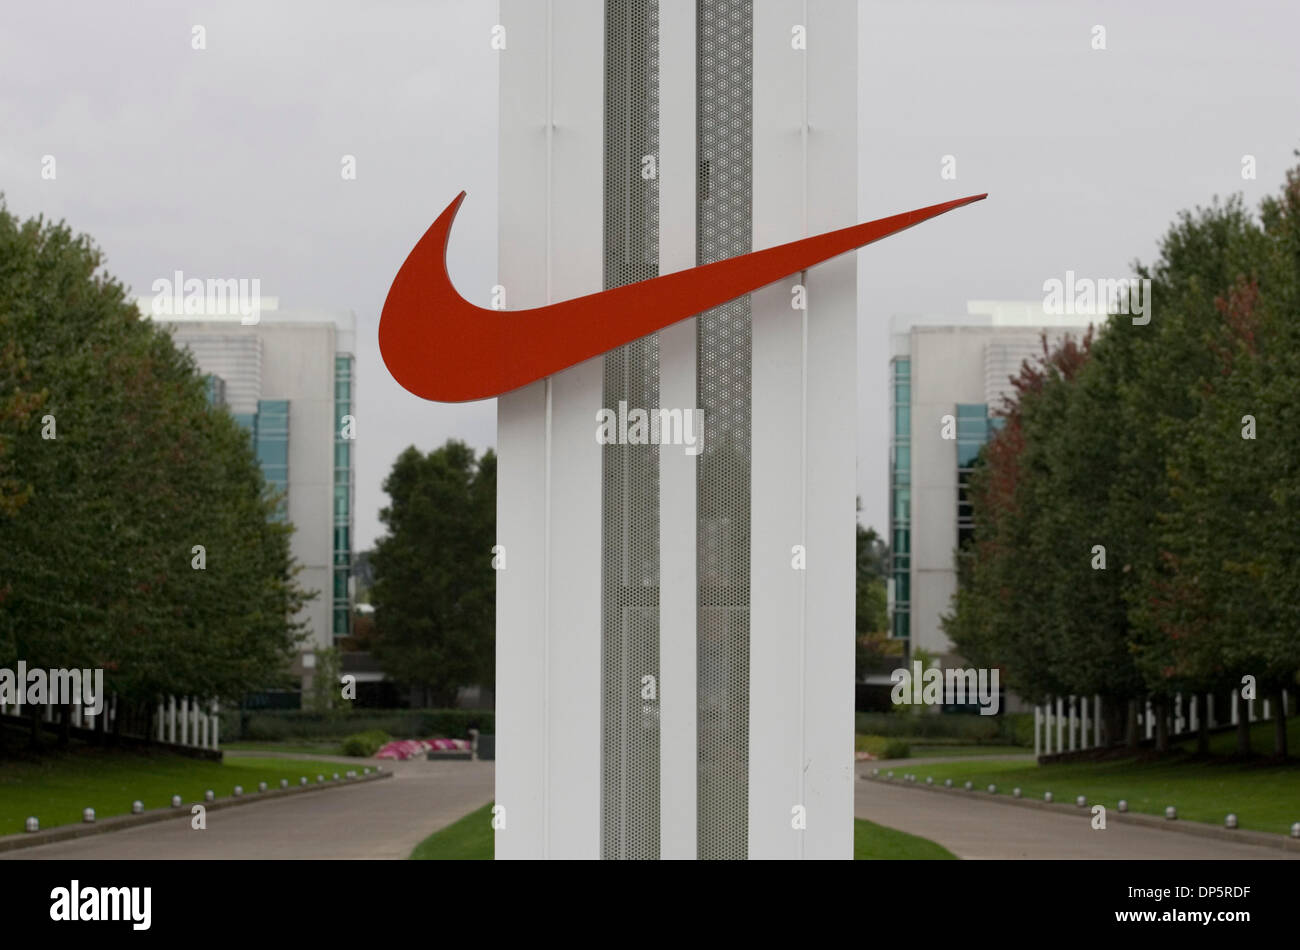 Sep 22, 2006; Beaverton, OR, USA; The Nike logo adorns the entrance to the  company's world headquarters in Beaverton, Oregon. Nike is a major American  manufacturer of athletic shoes, clothing and sports